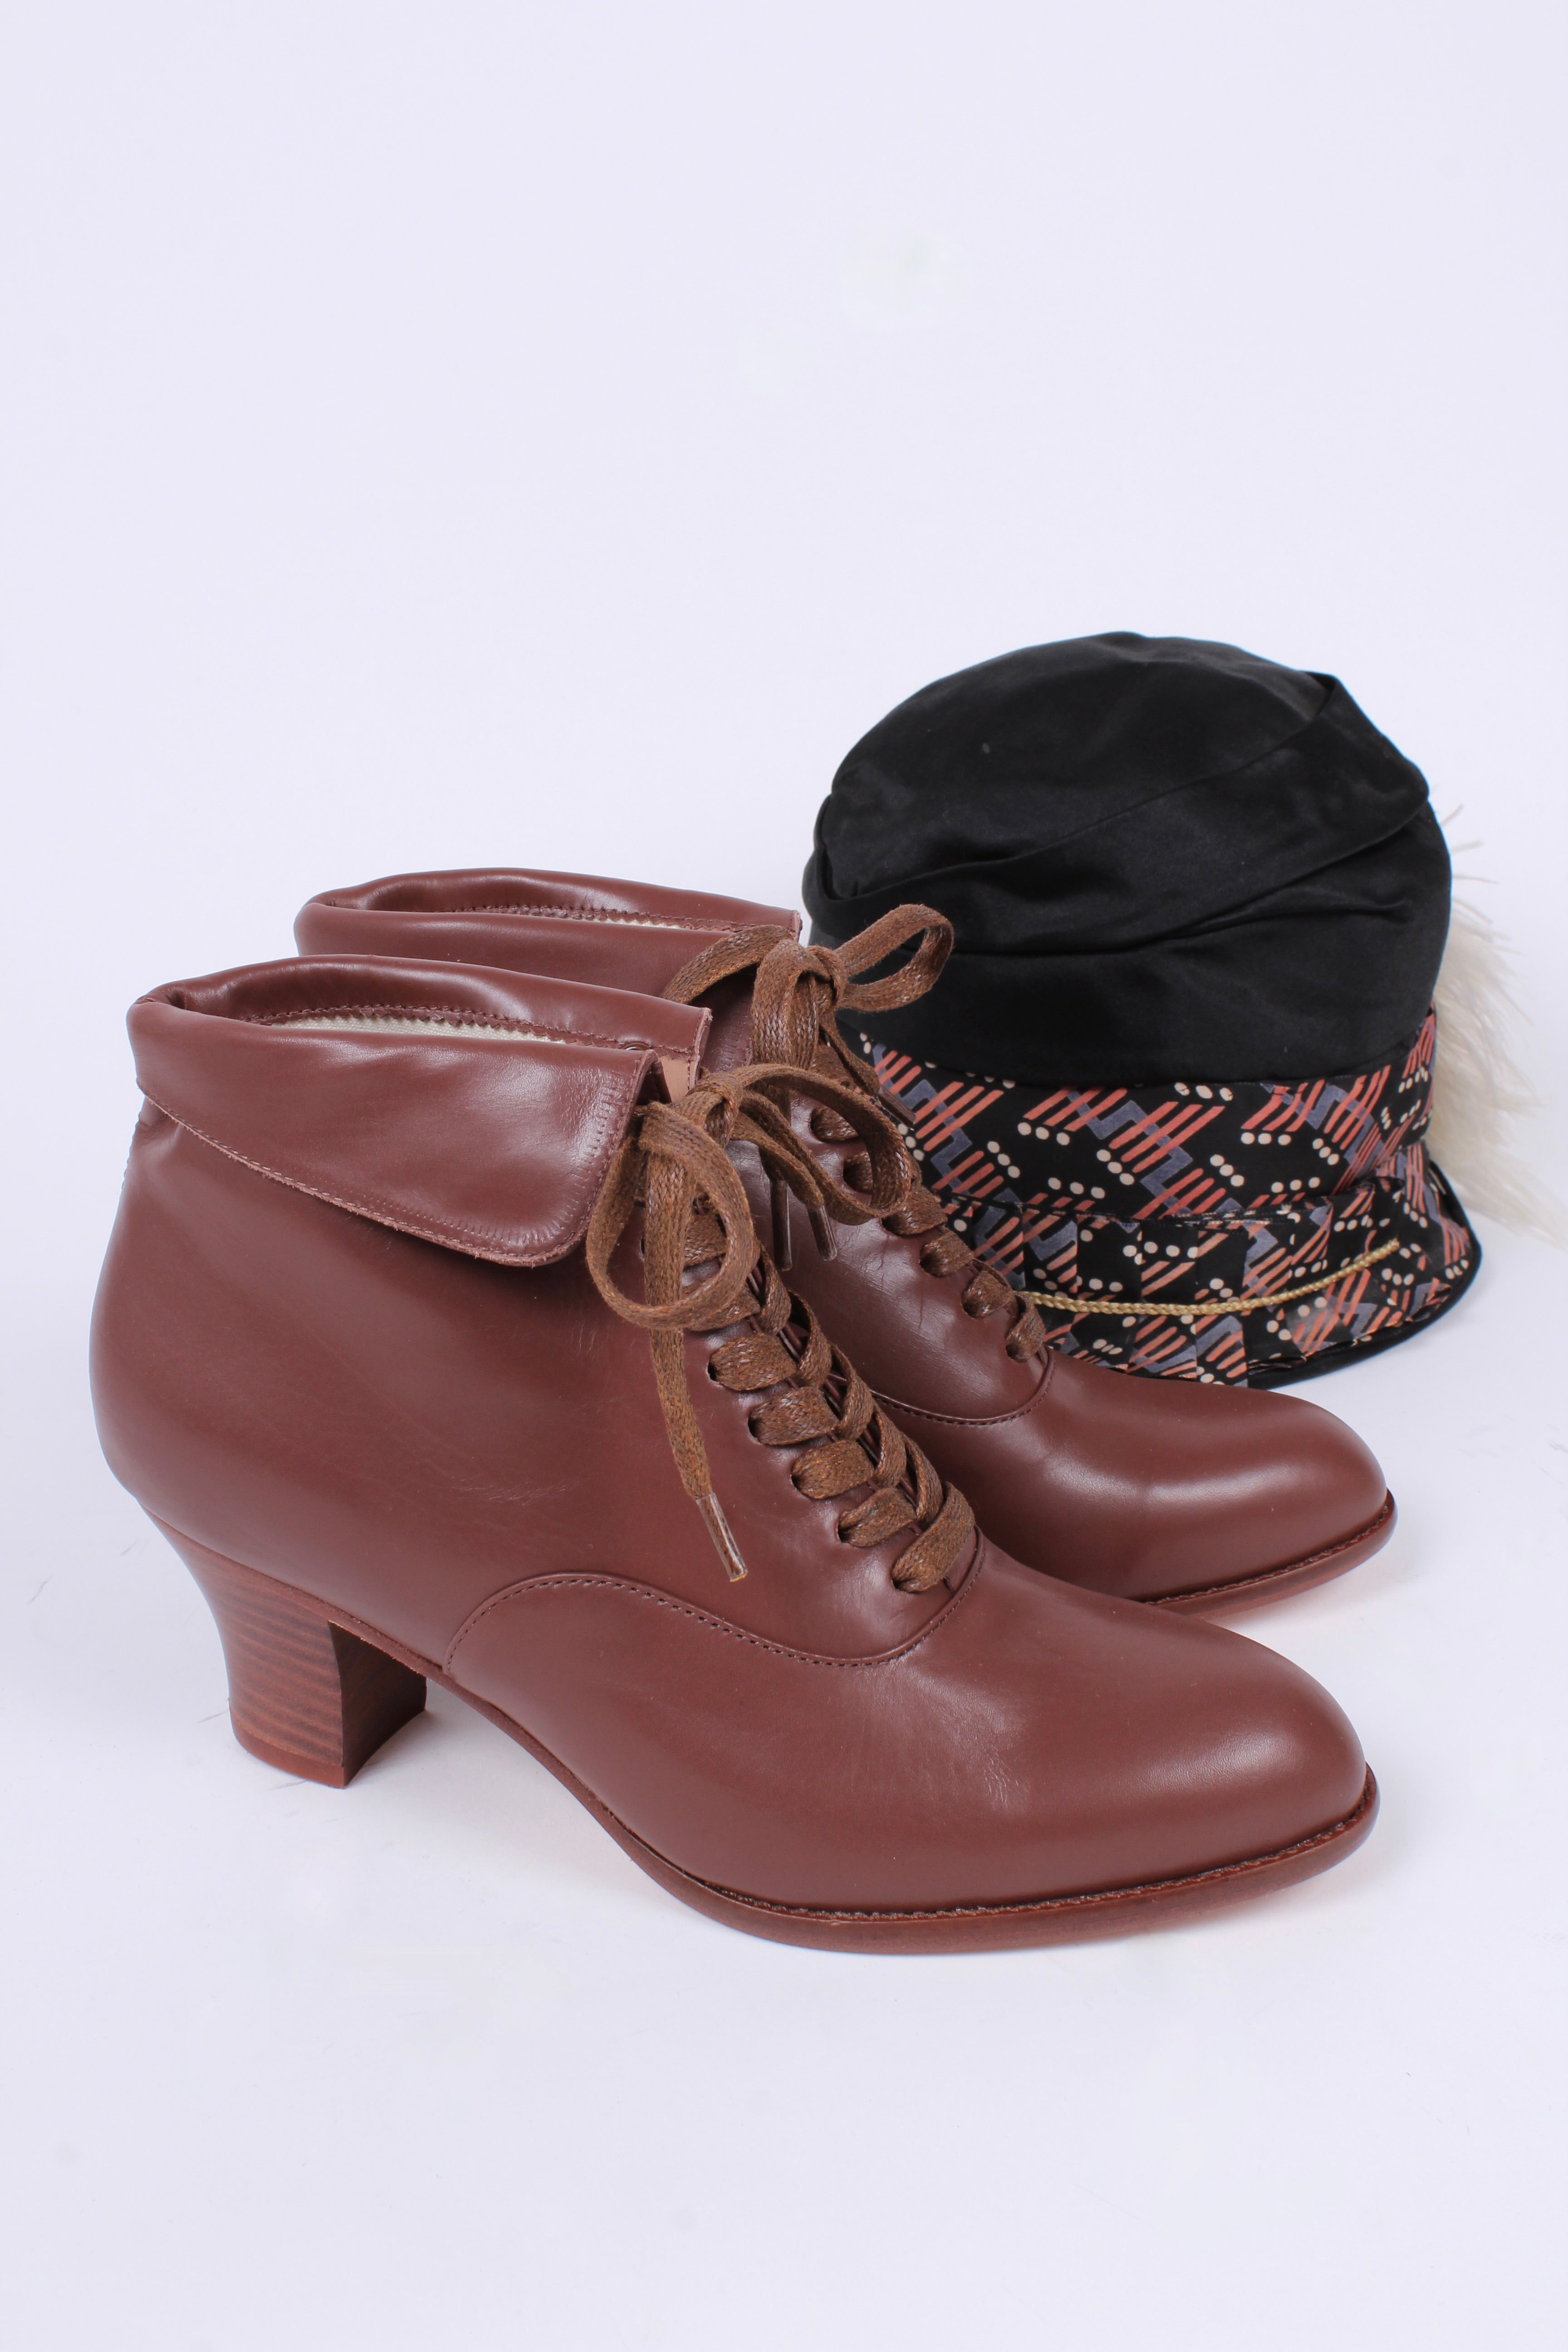 1930s style leather lace-up ankle boot - Brown - Betty